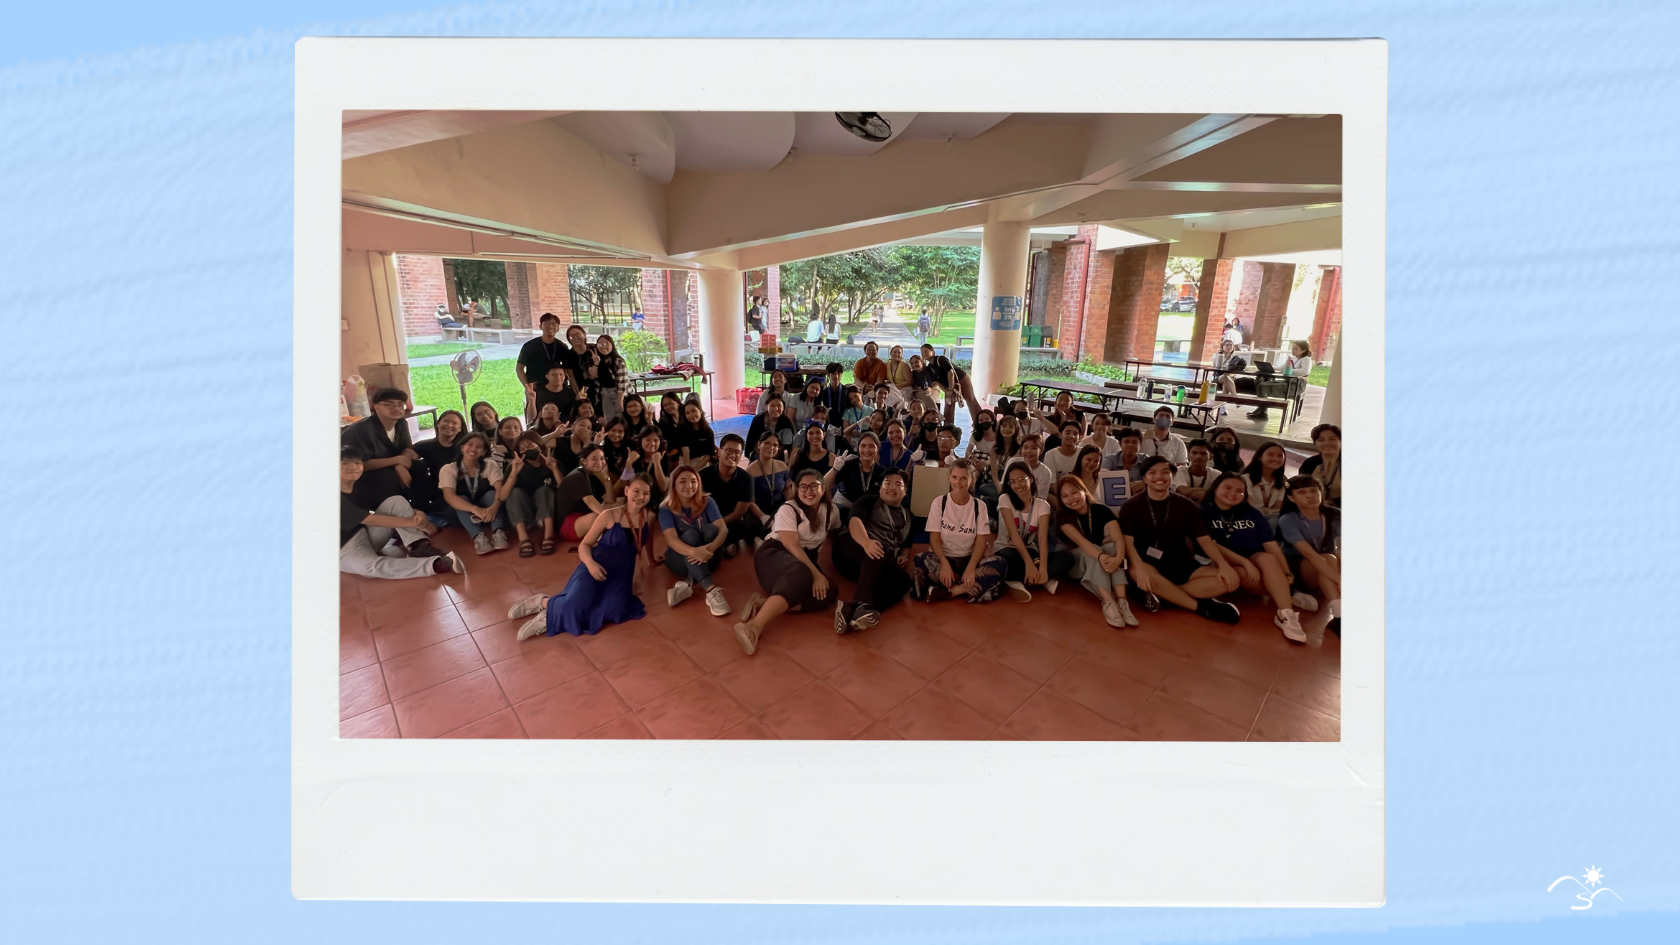 A Polaroid-like photo that has a photo of multiple students and their volunteers in Ateneo's SEC Foyer.